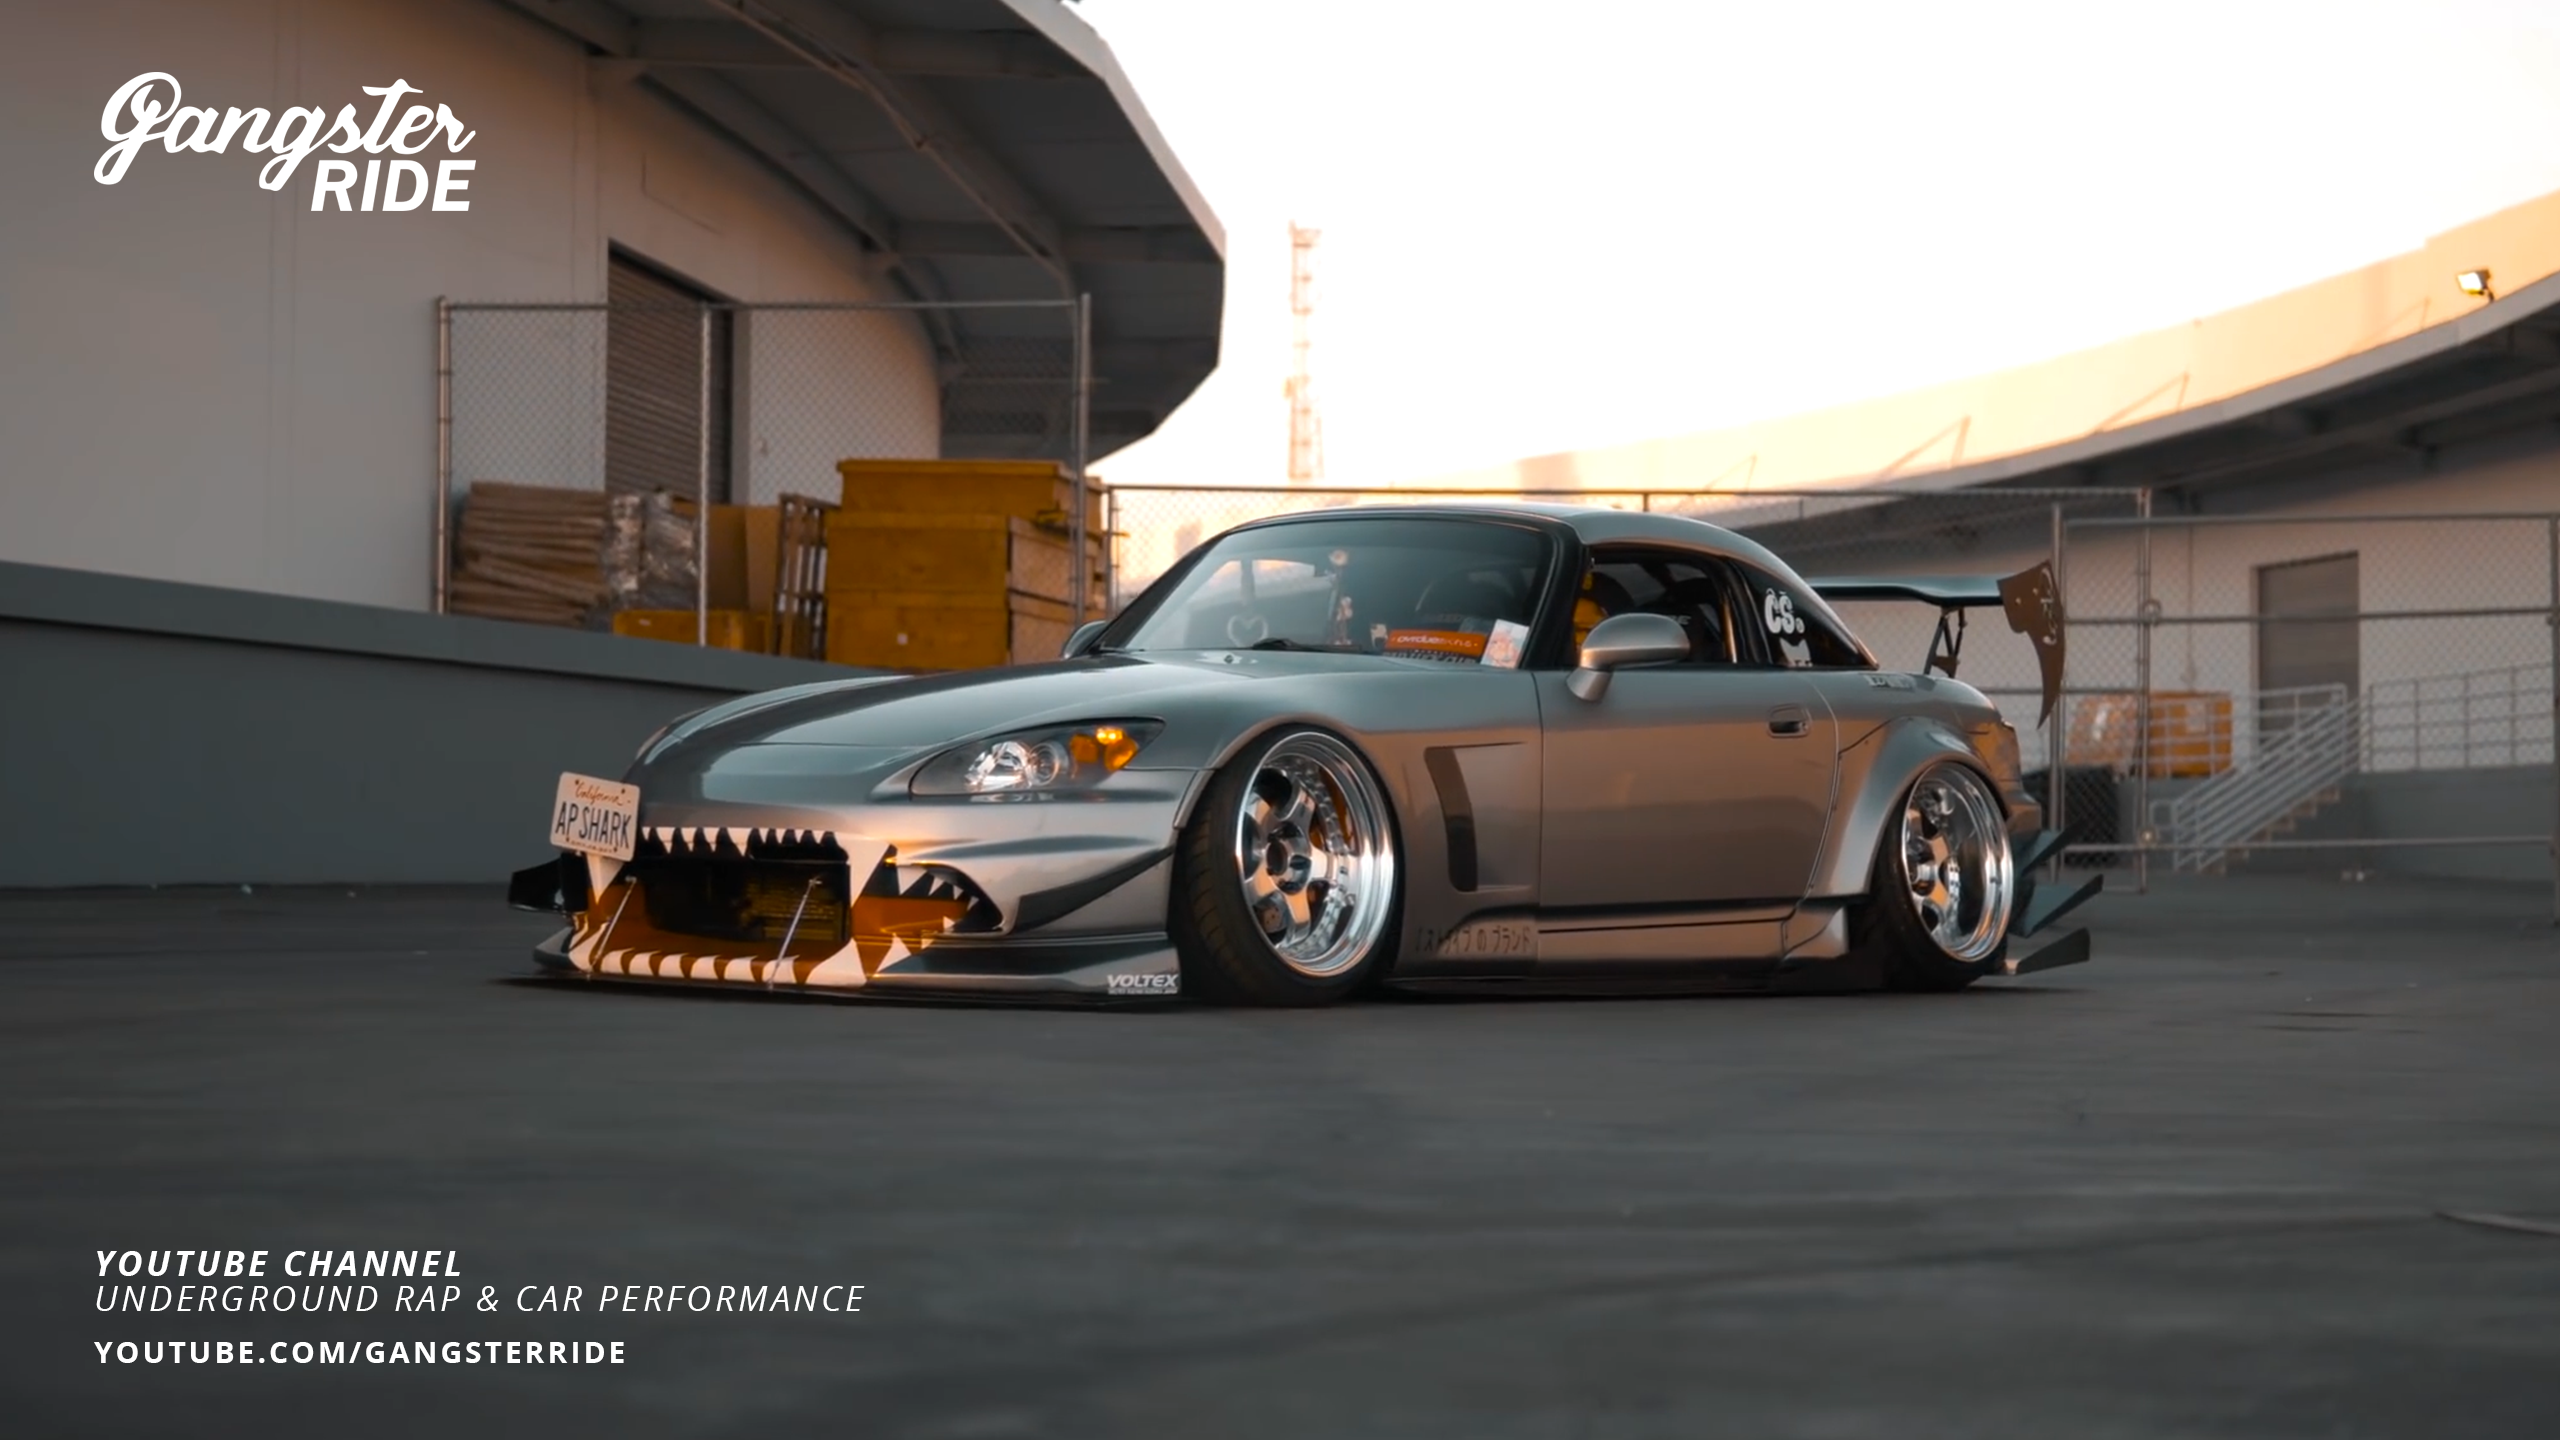 S2000 Honda S2000 The Shark S2000 YouTube Tuner Car Modified Stance Nation 2560x1440